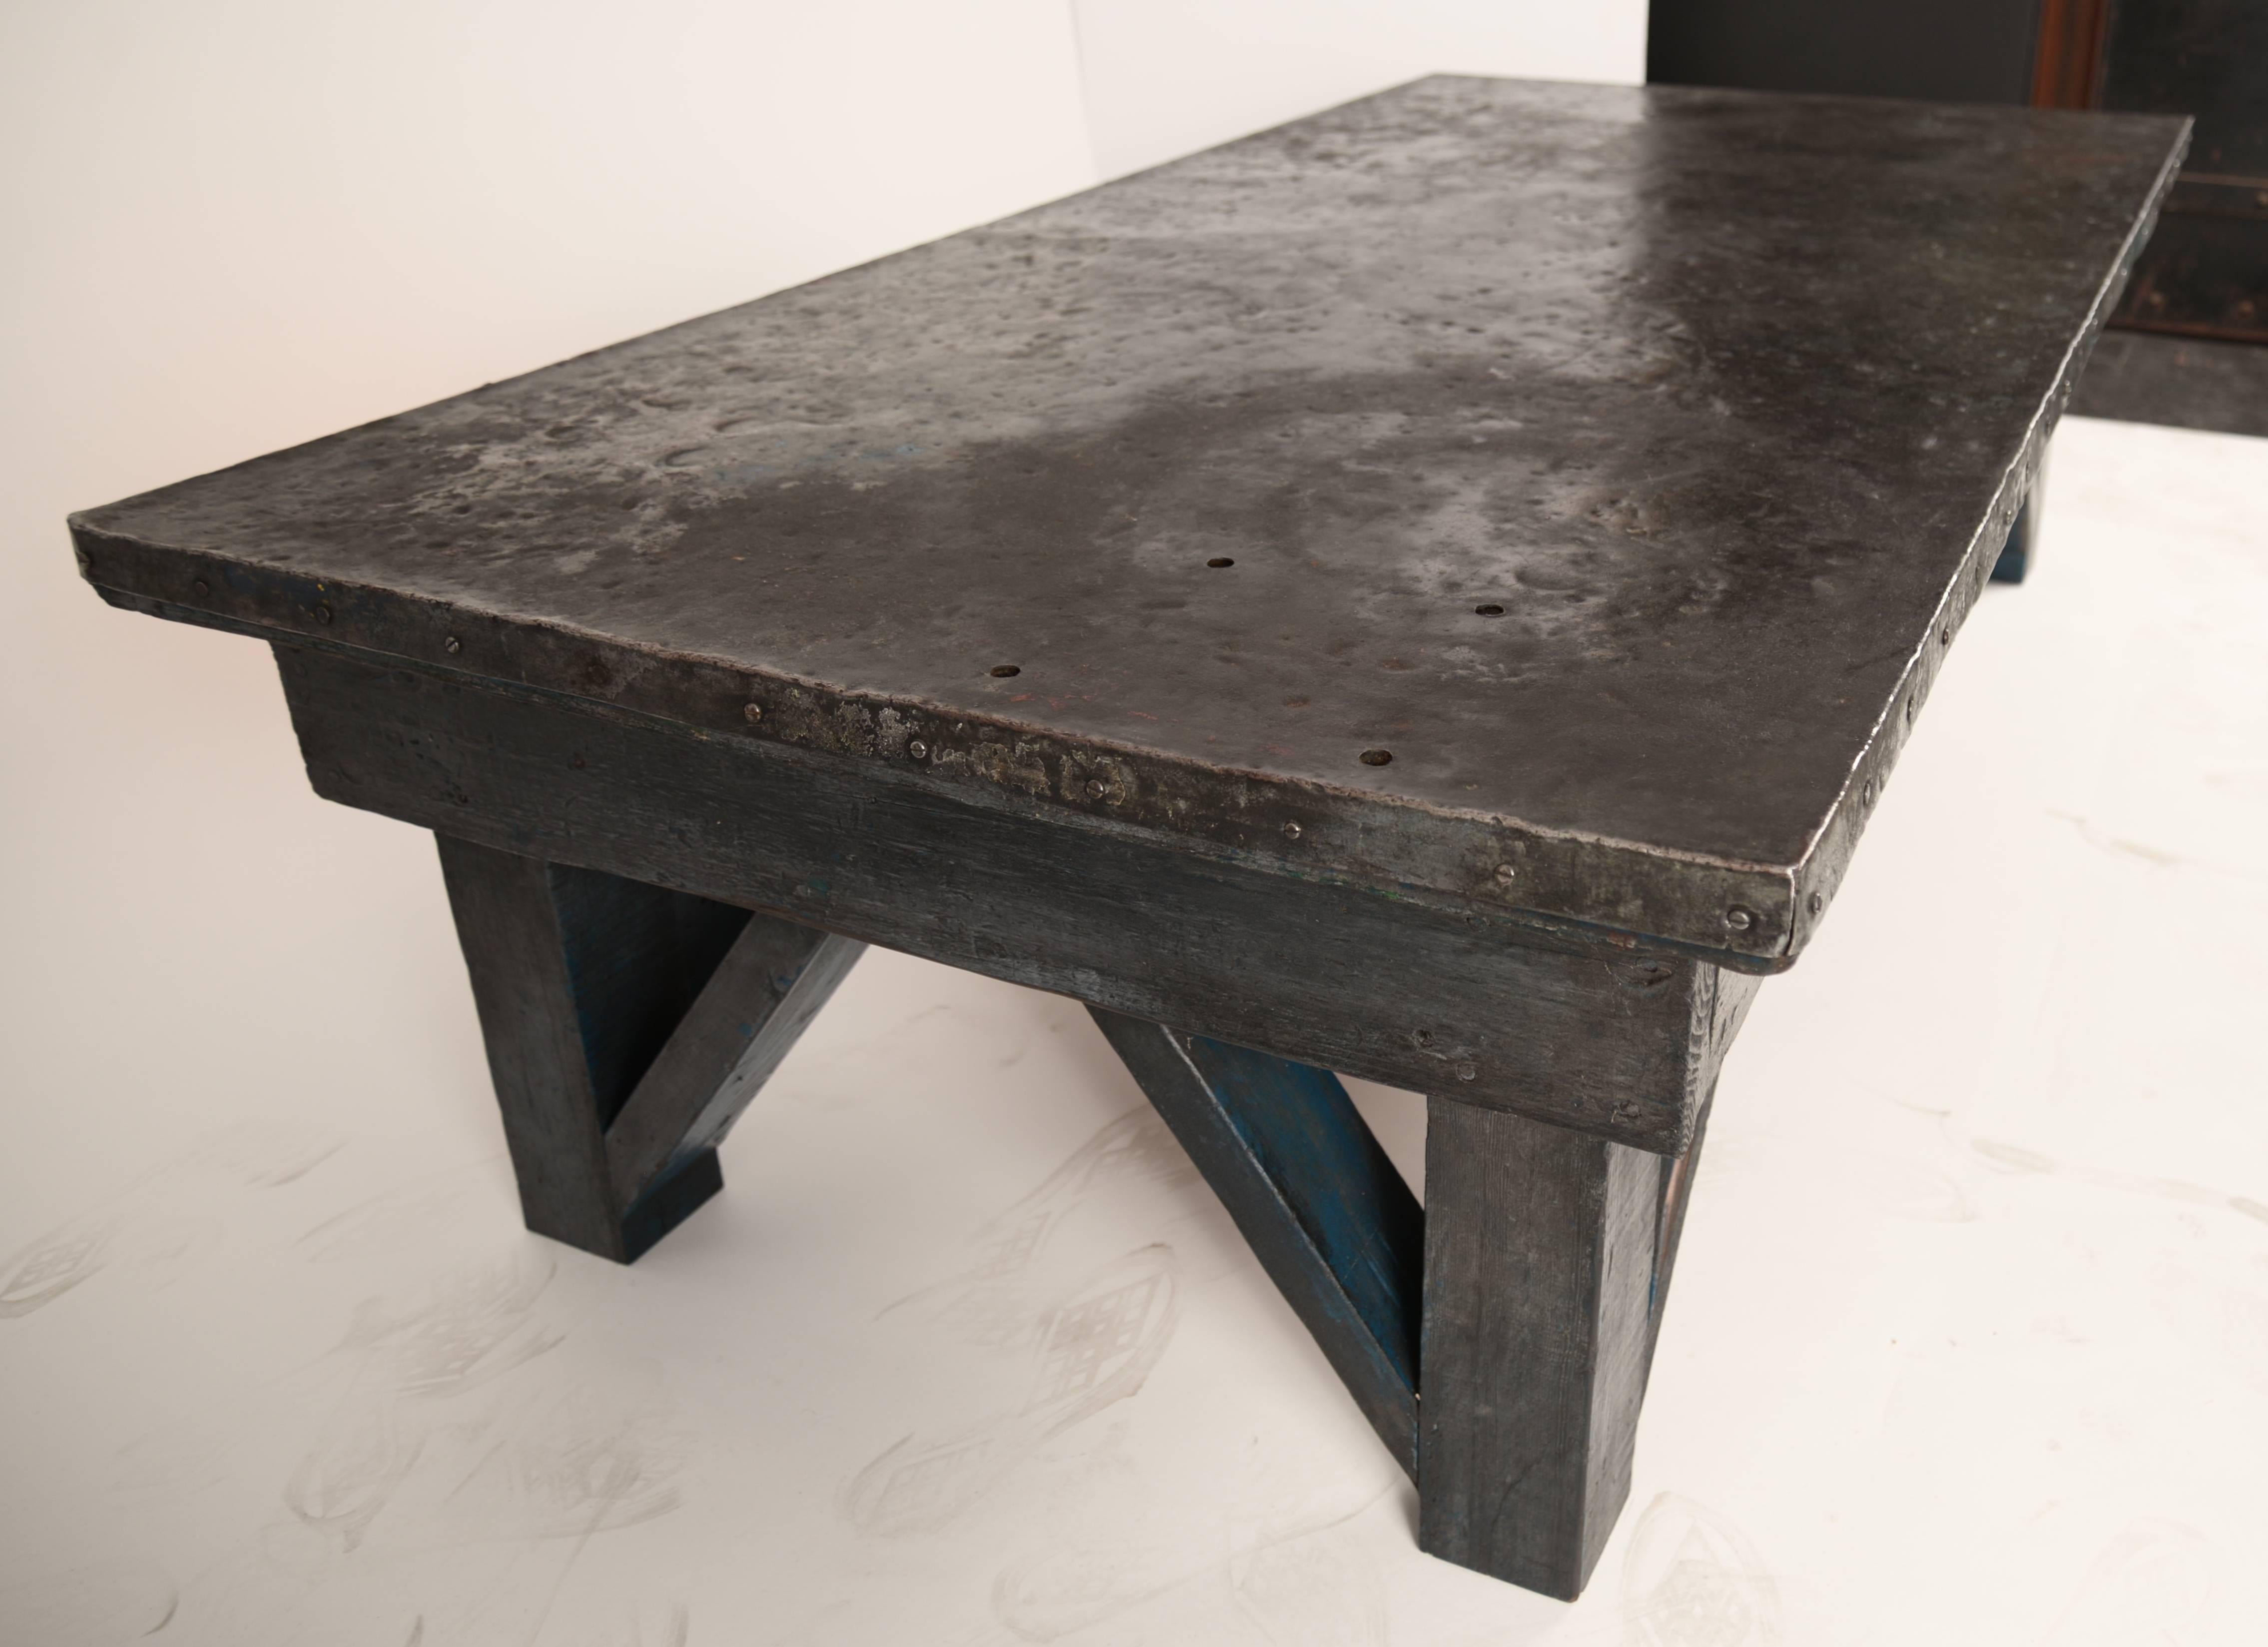 Steel capped wooden low work table. The patina is perfection without any sharp edges or breaks. The gray painted base and the top have been thoroughly cleaned and waxed. This would be equally at home as a coffee table or a bench.